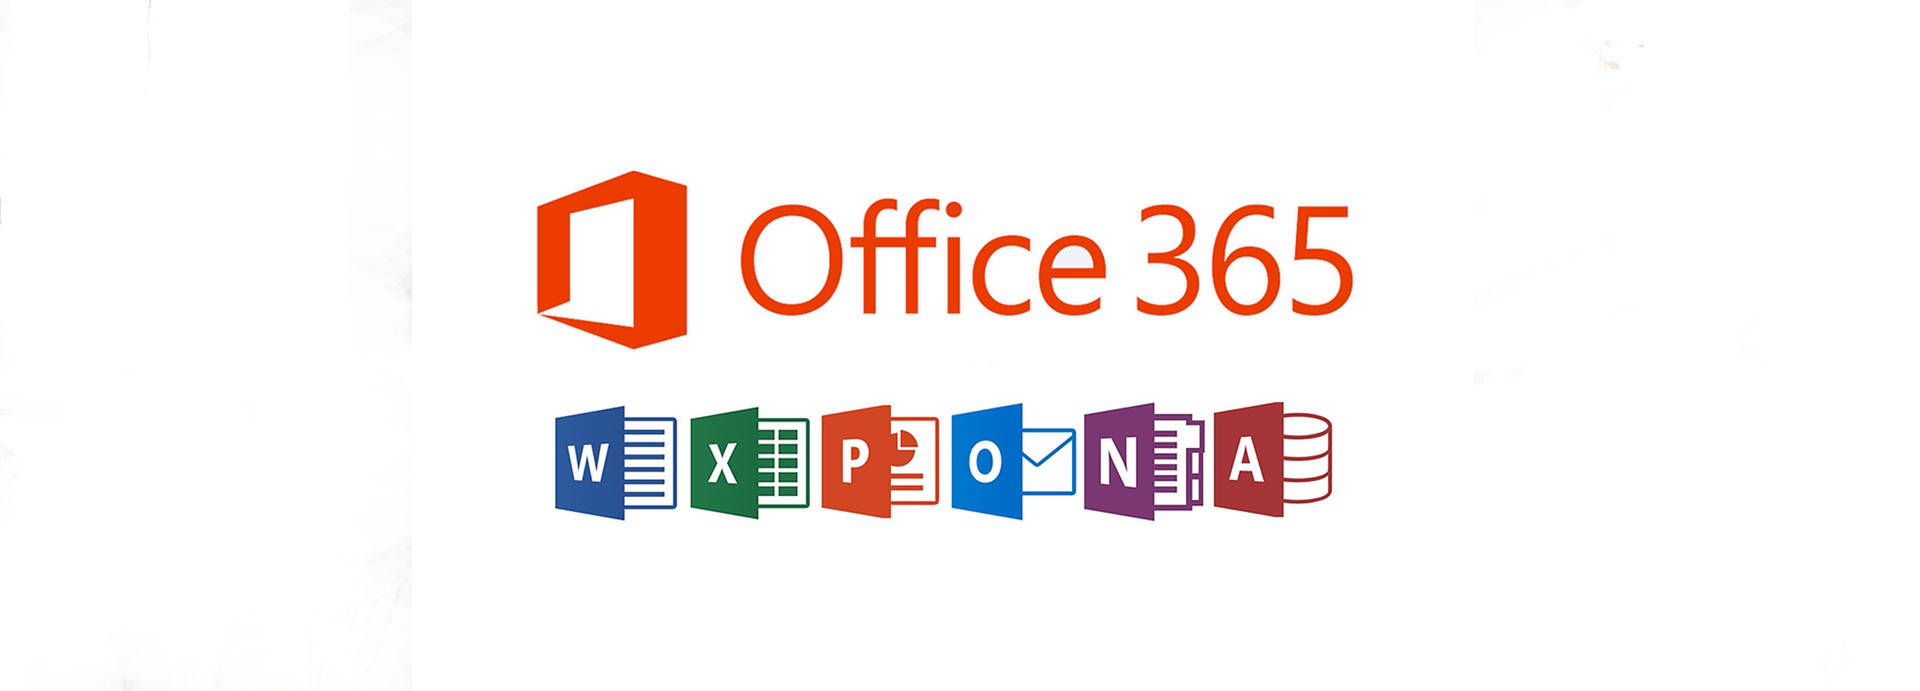 Office 365 Application Icon Wallpaper